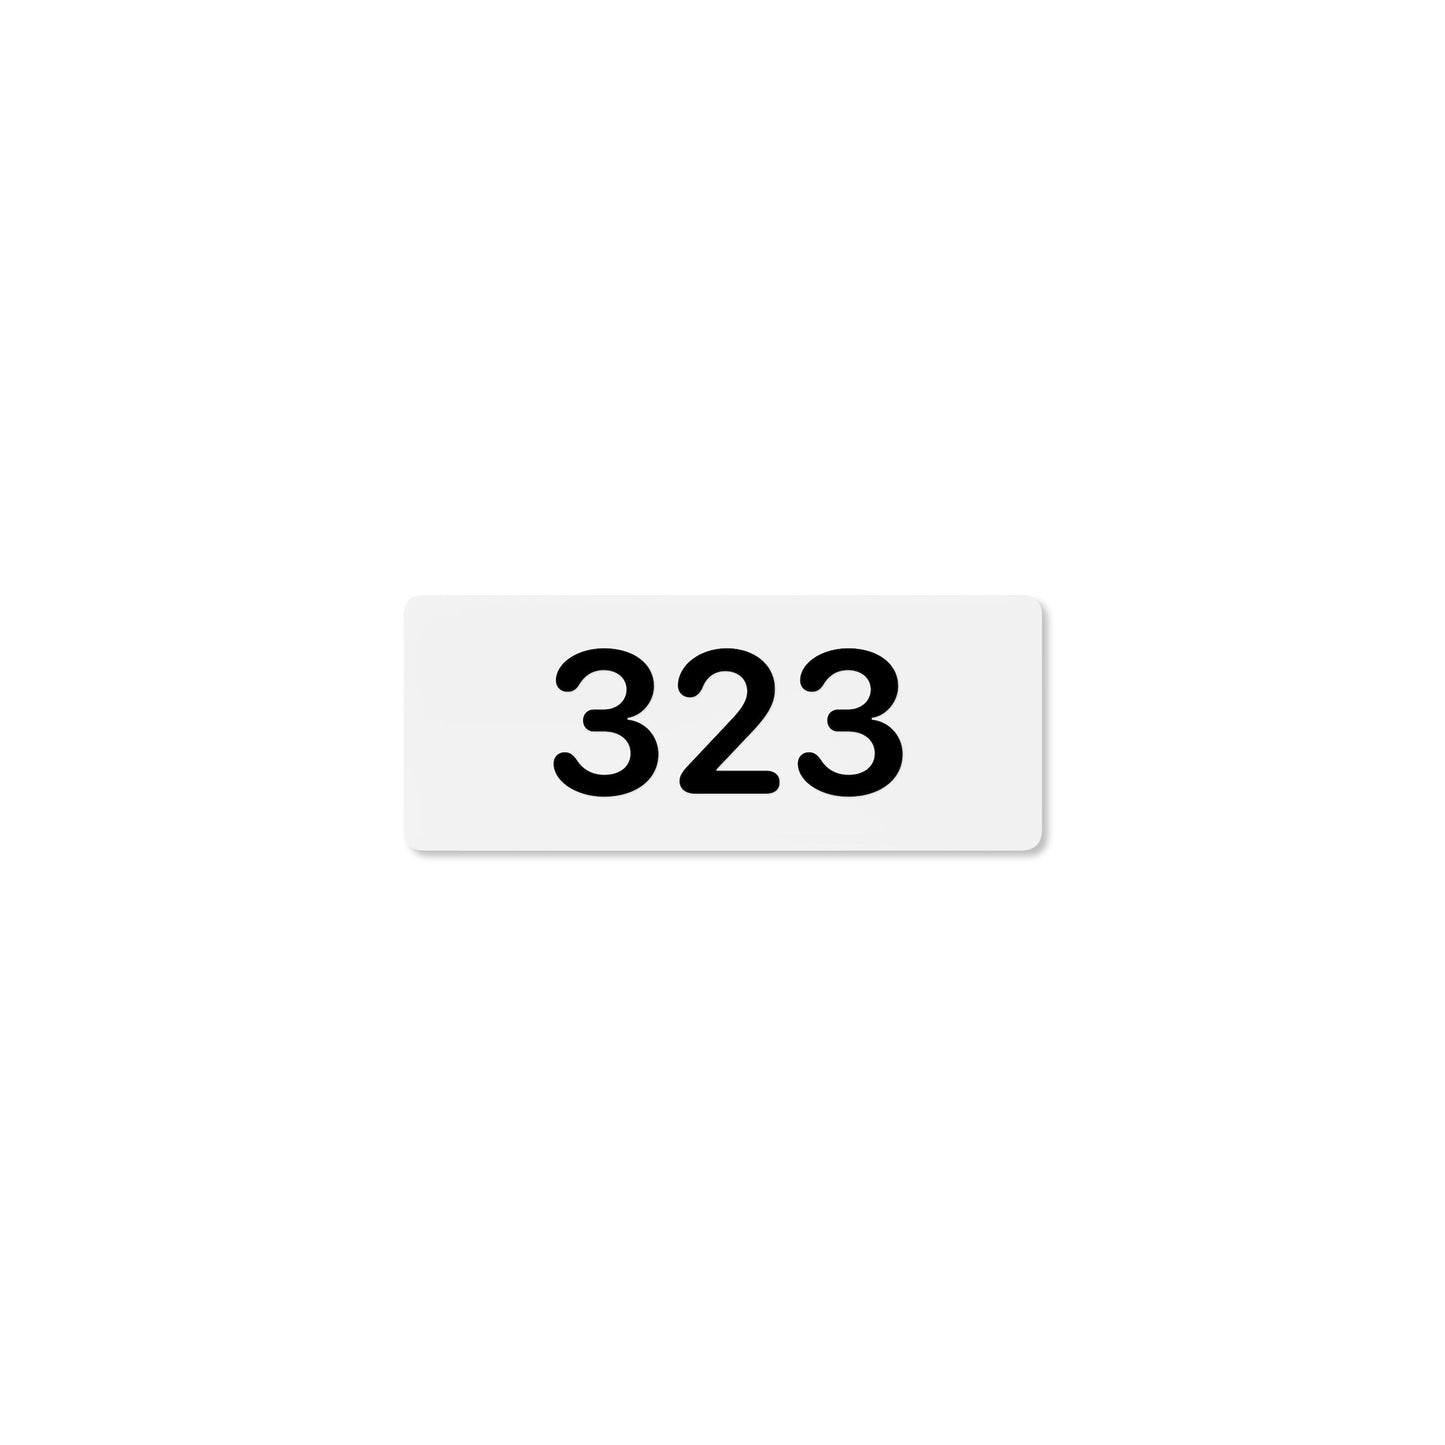 Numeral 323